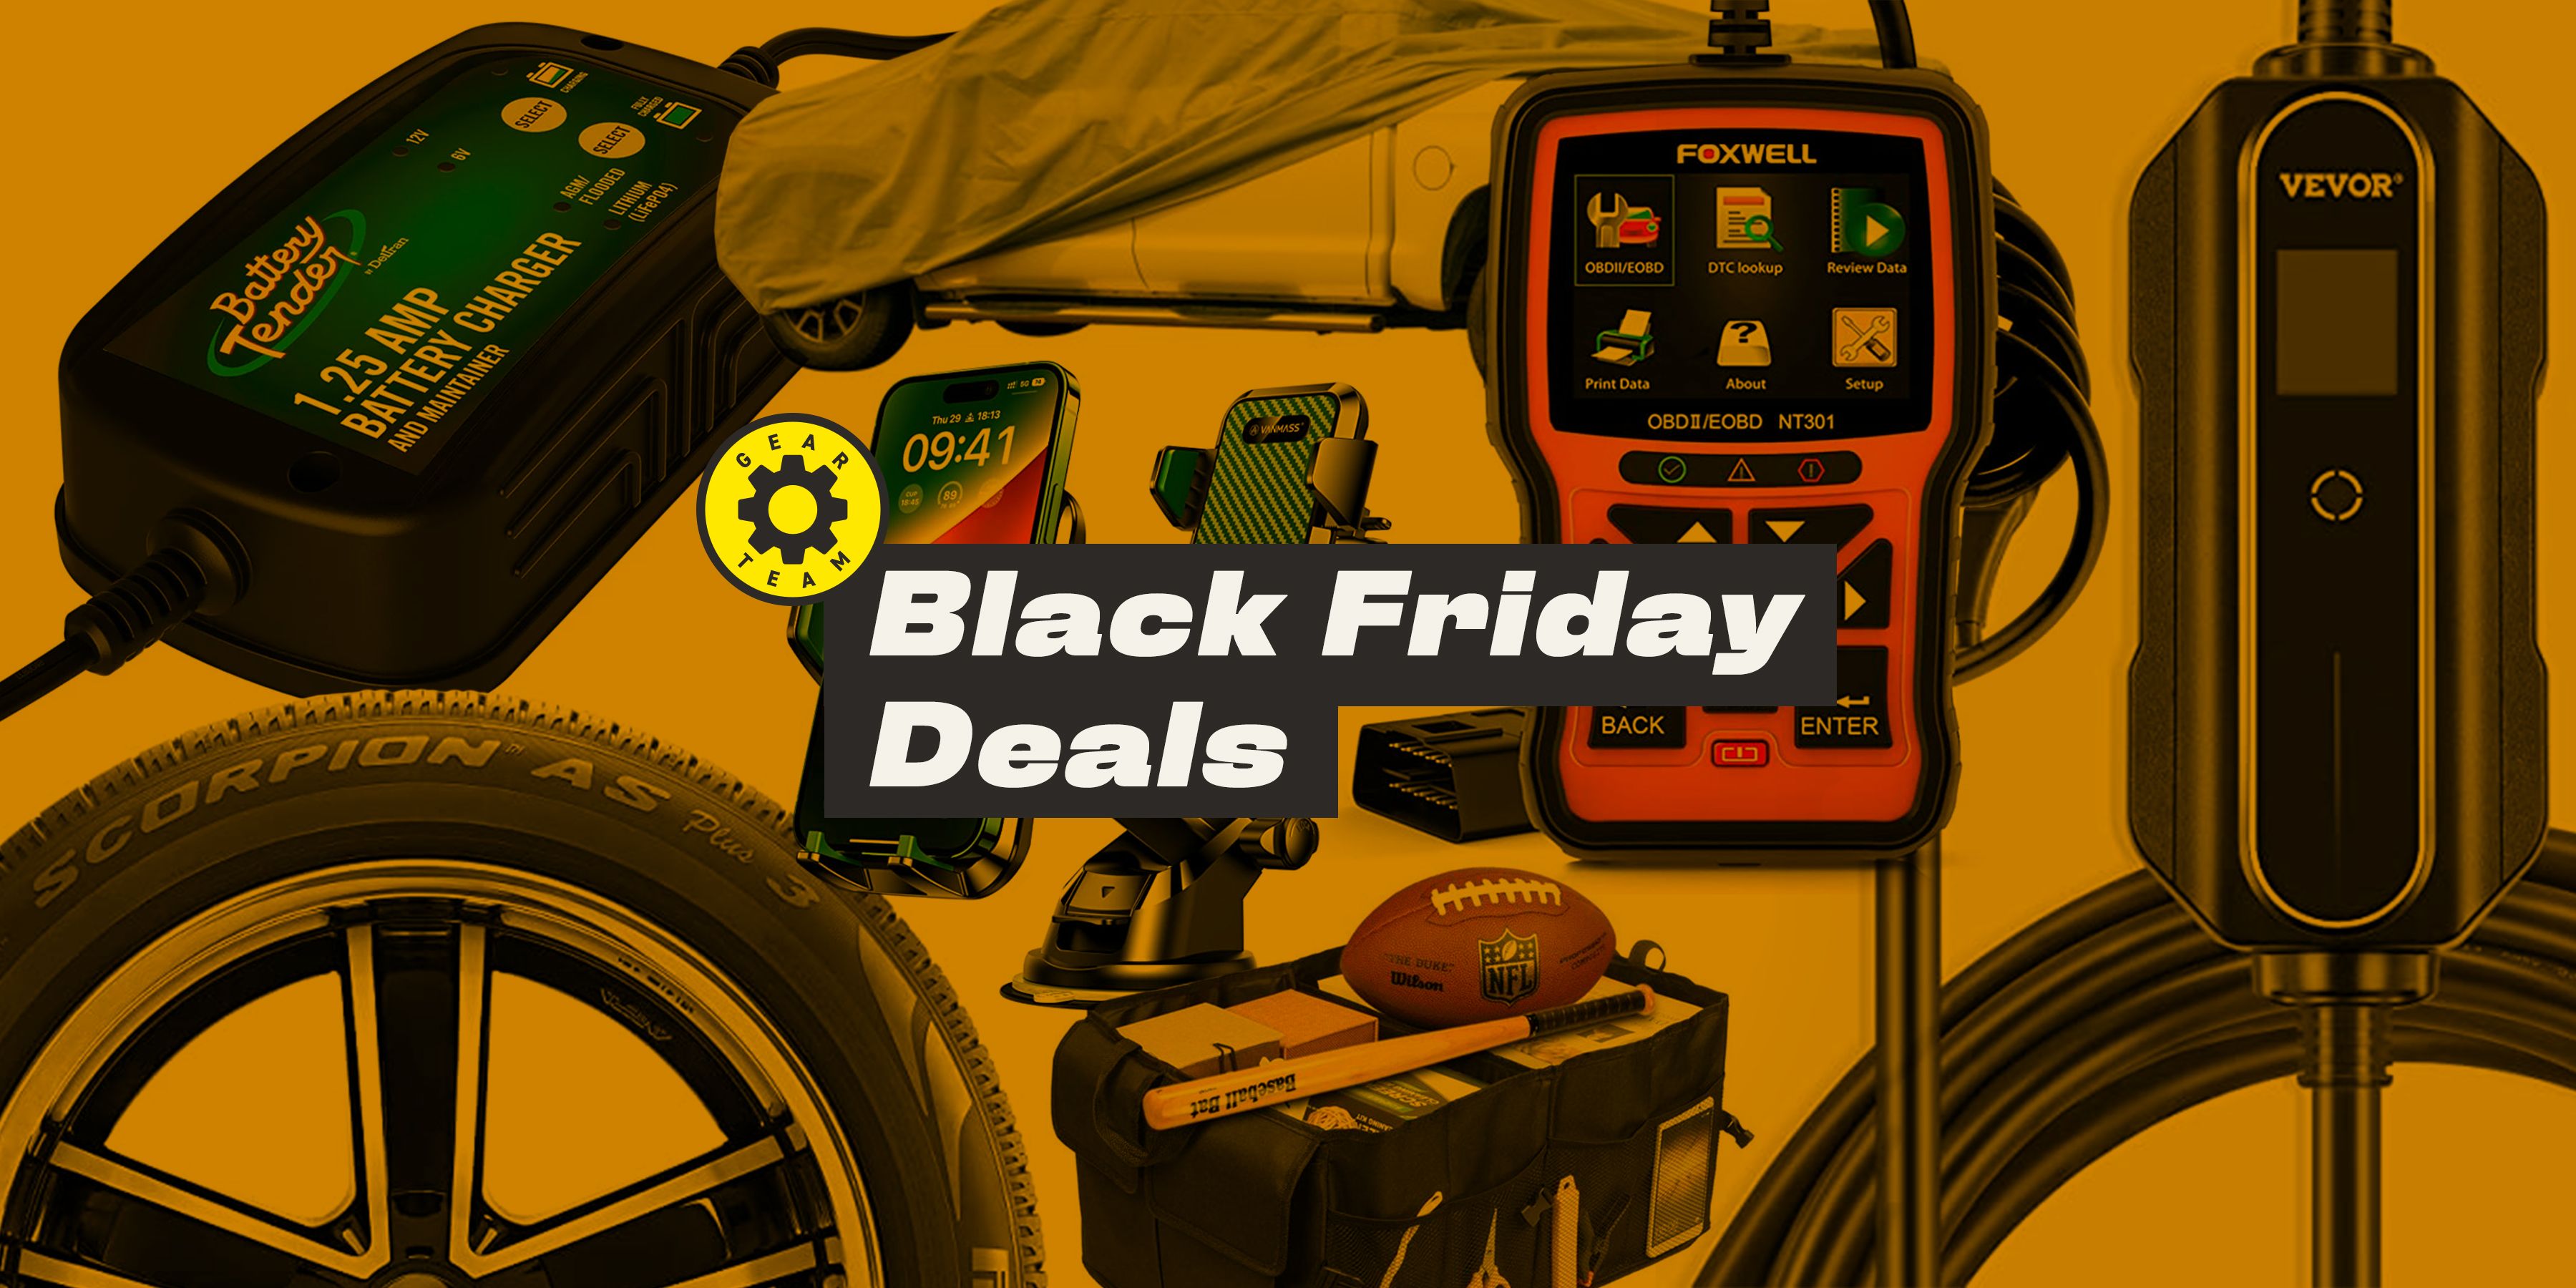 Black Friday Deals Are Here — 1000s of Auto Parts, Tools, Tech, and Accessories On Sale